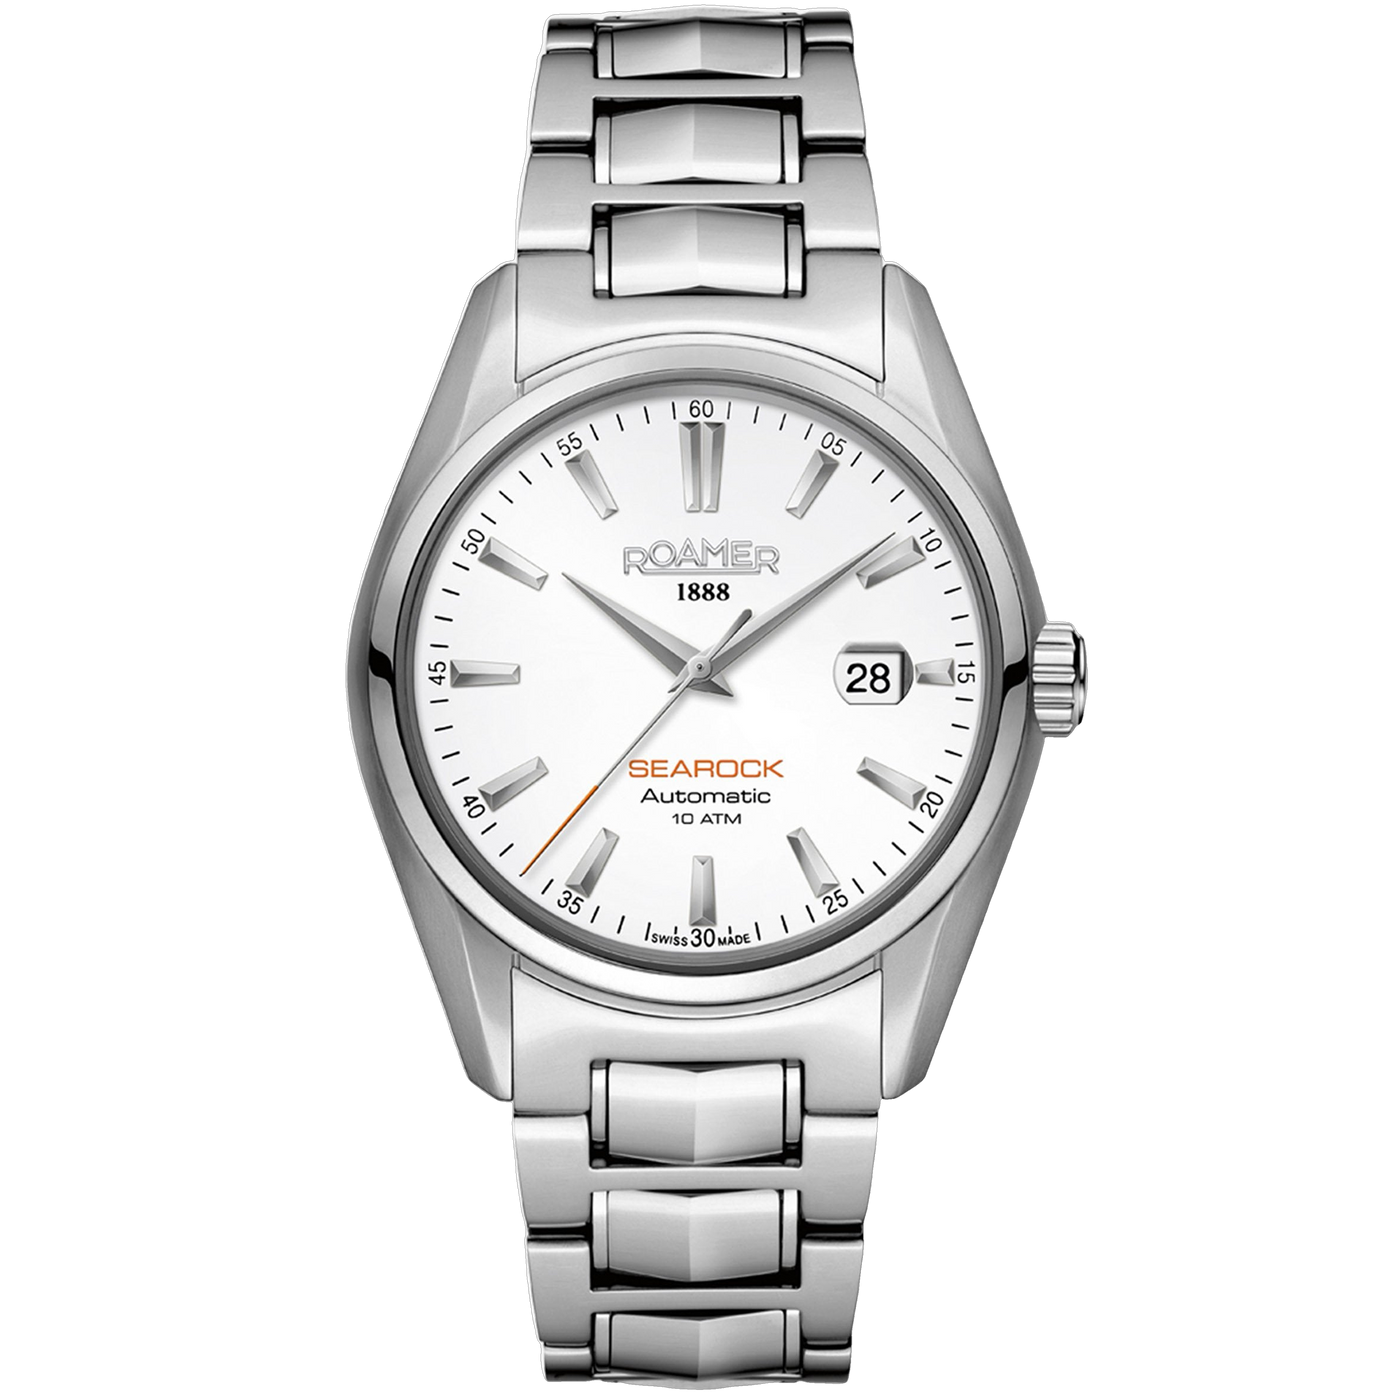 Roamer Searock Automatic - Gharyal by Collectibles 